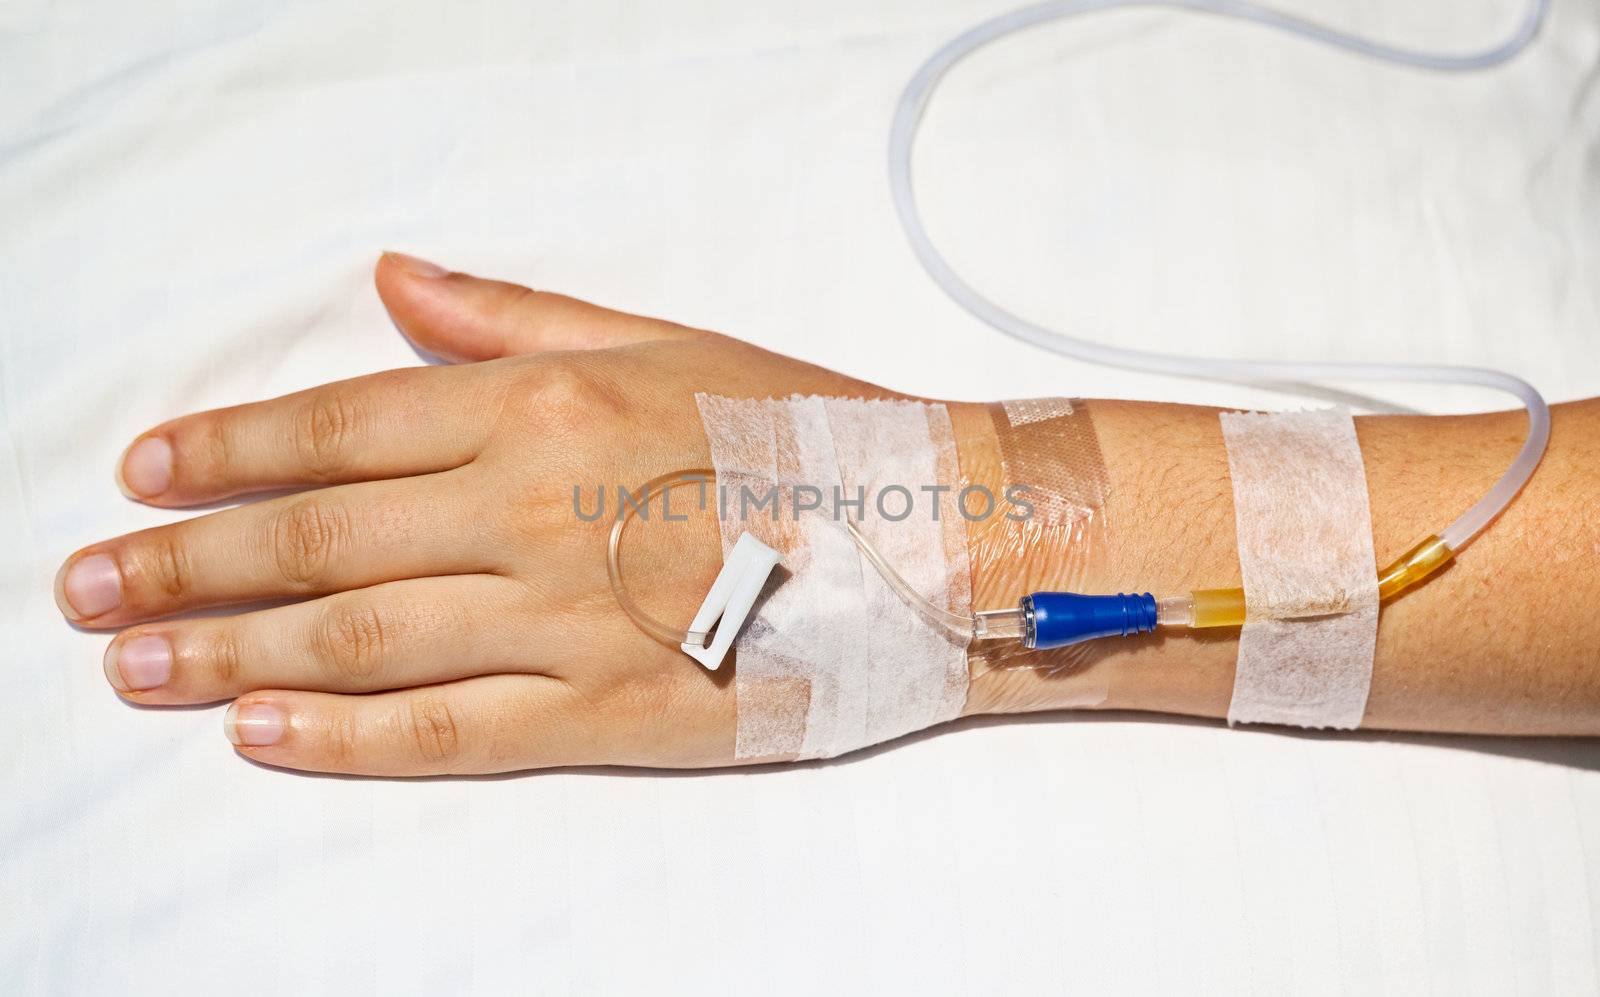 Medical intravenous cannula on hand by pzaxe